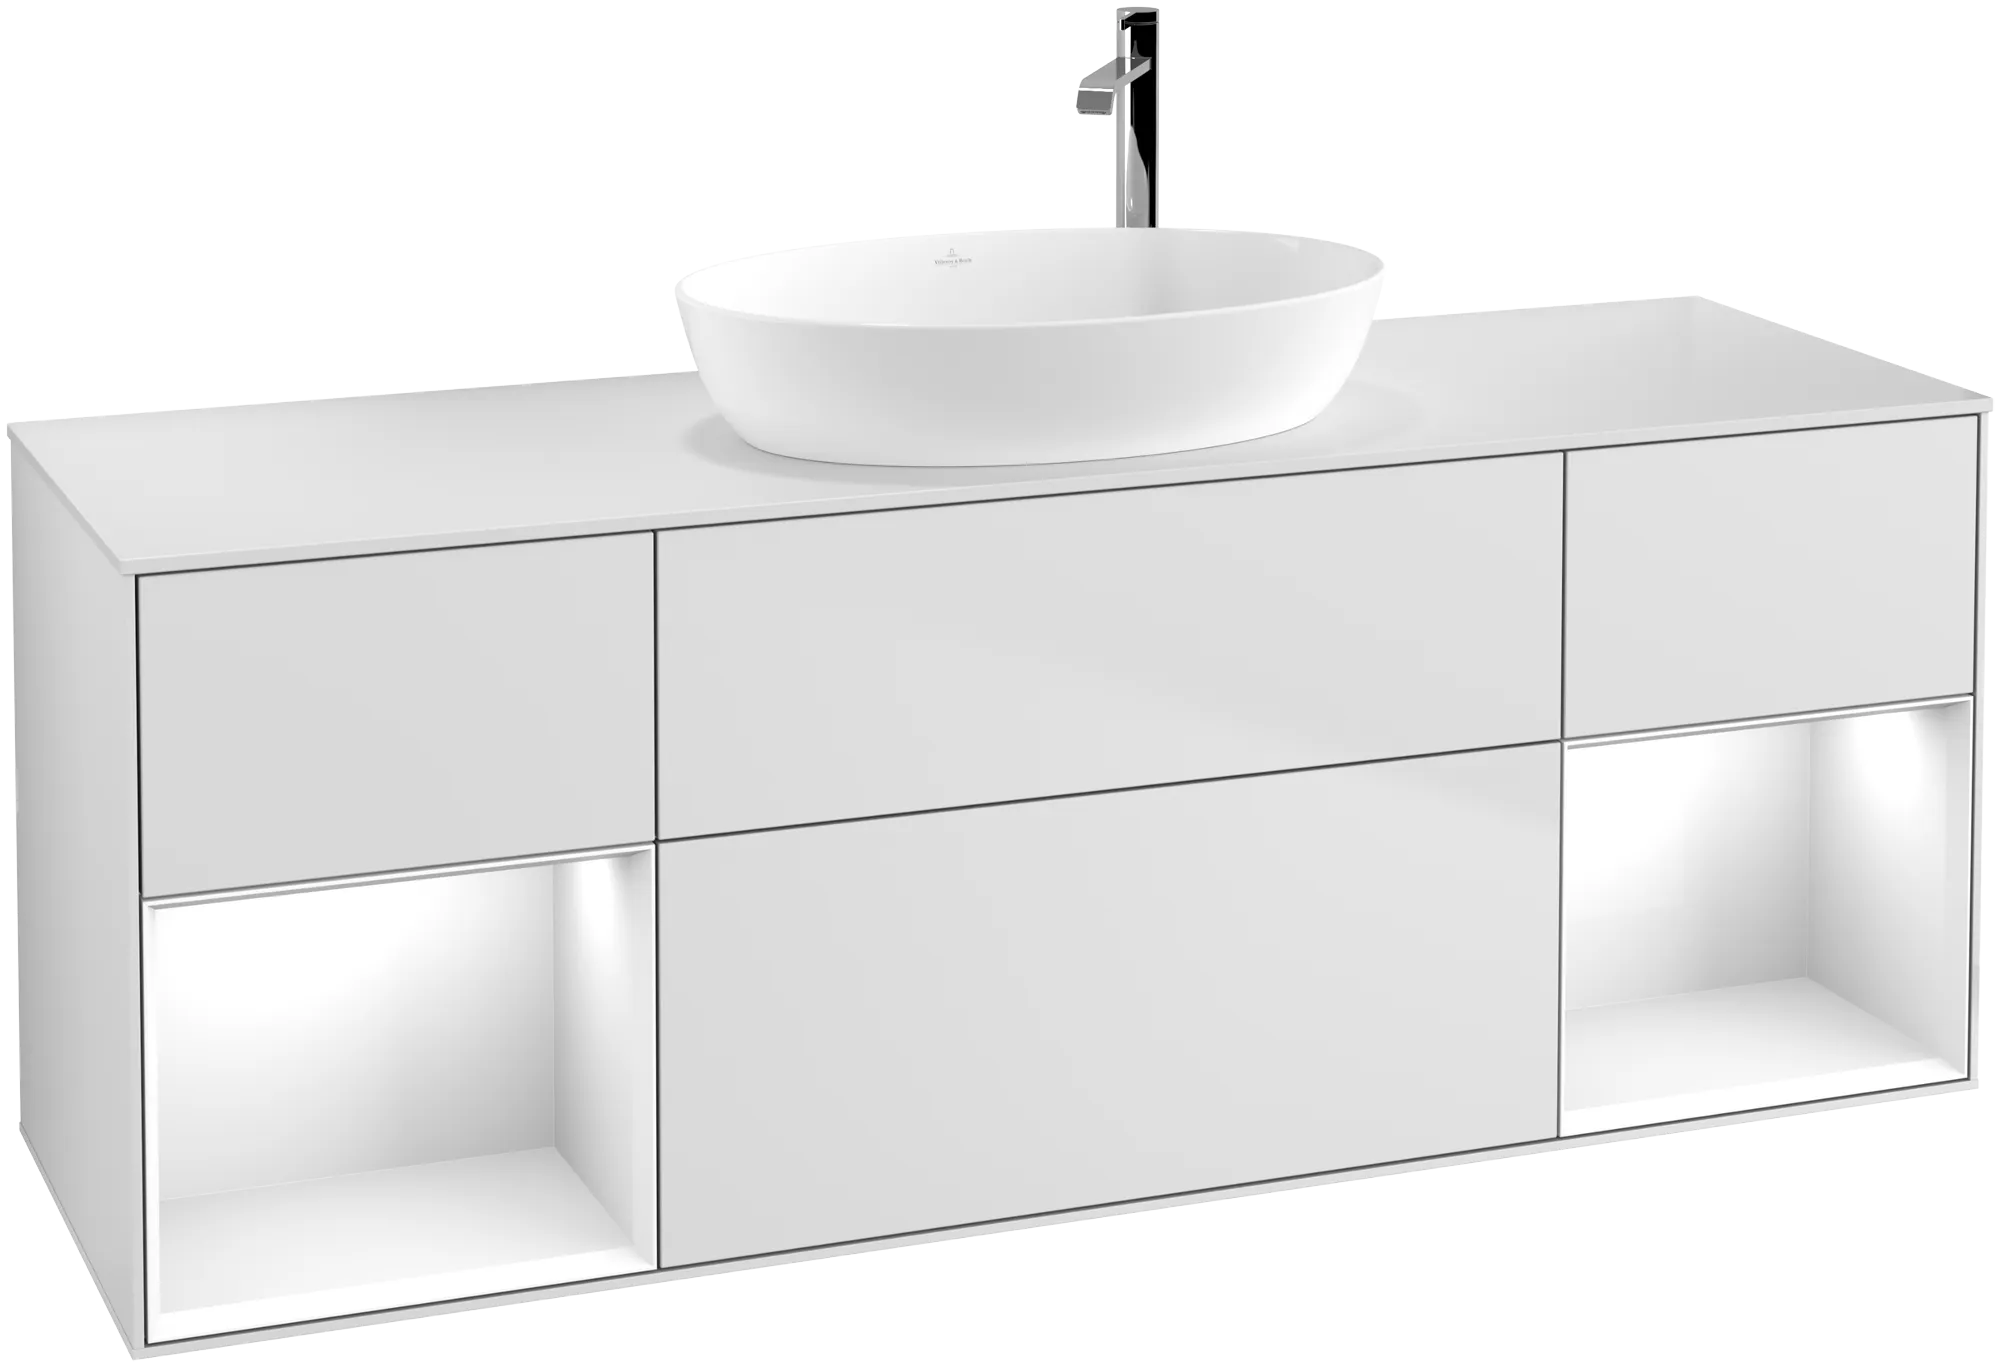 Зображення з  VILLEROY BOCH Finion Vanity unit, with lighting, 4 pull-out compartments, 1600 x 603 x 501 mm, White Matt Lacquer / Glossy White Lacquer / Glass White Matt #G981GFMT